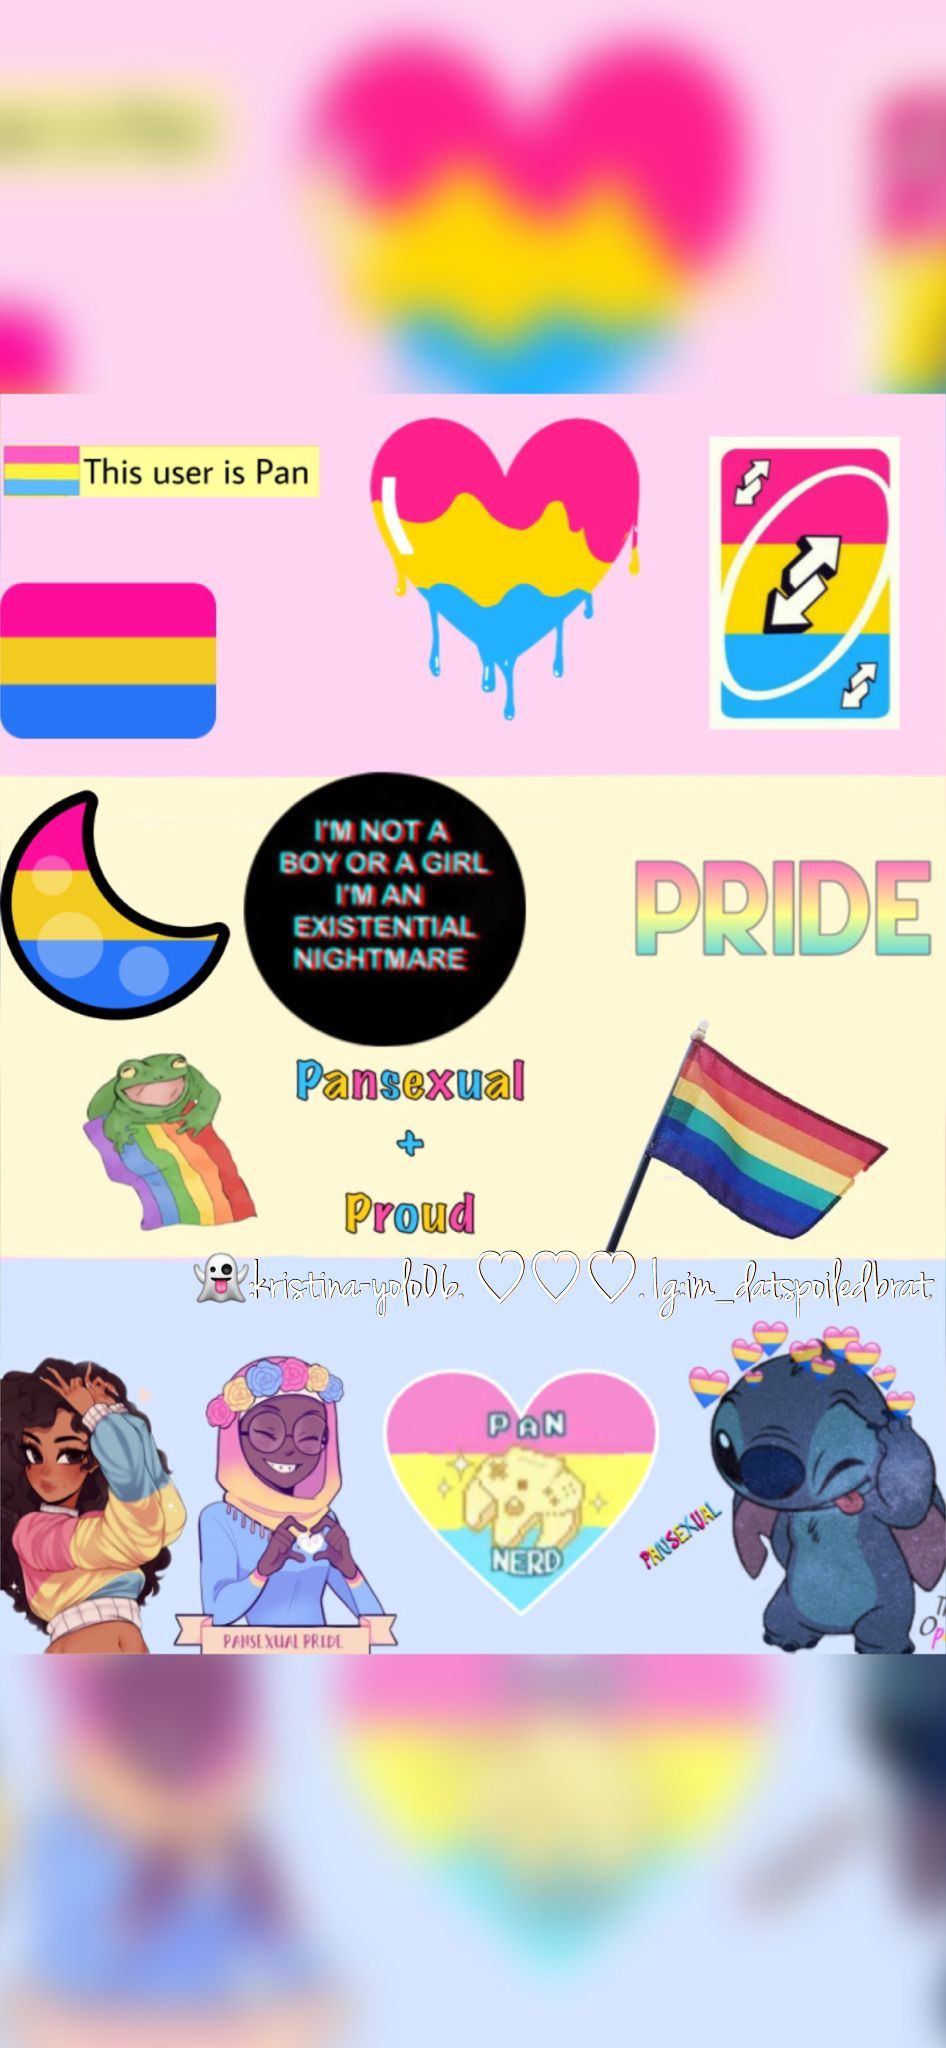 A collage of images and text, including a rainbow heart, a rainbow flag, and text that says 